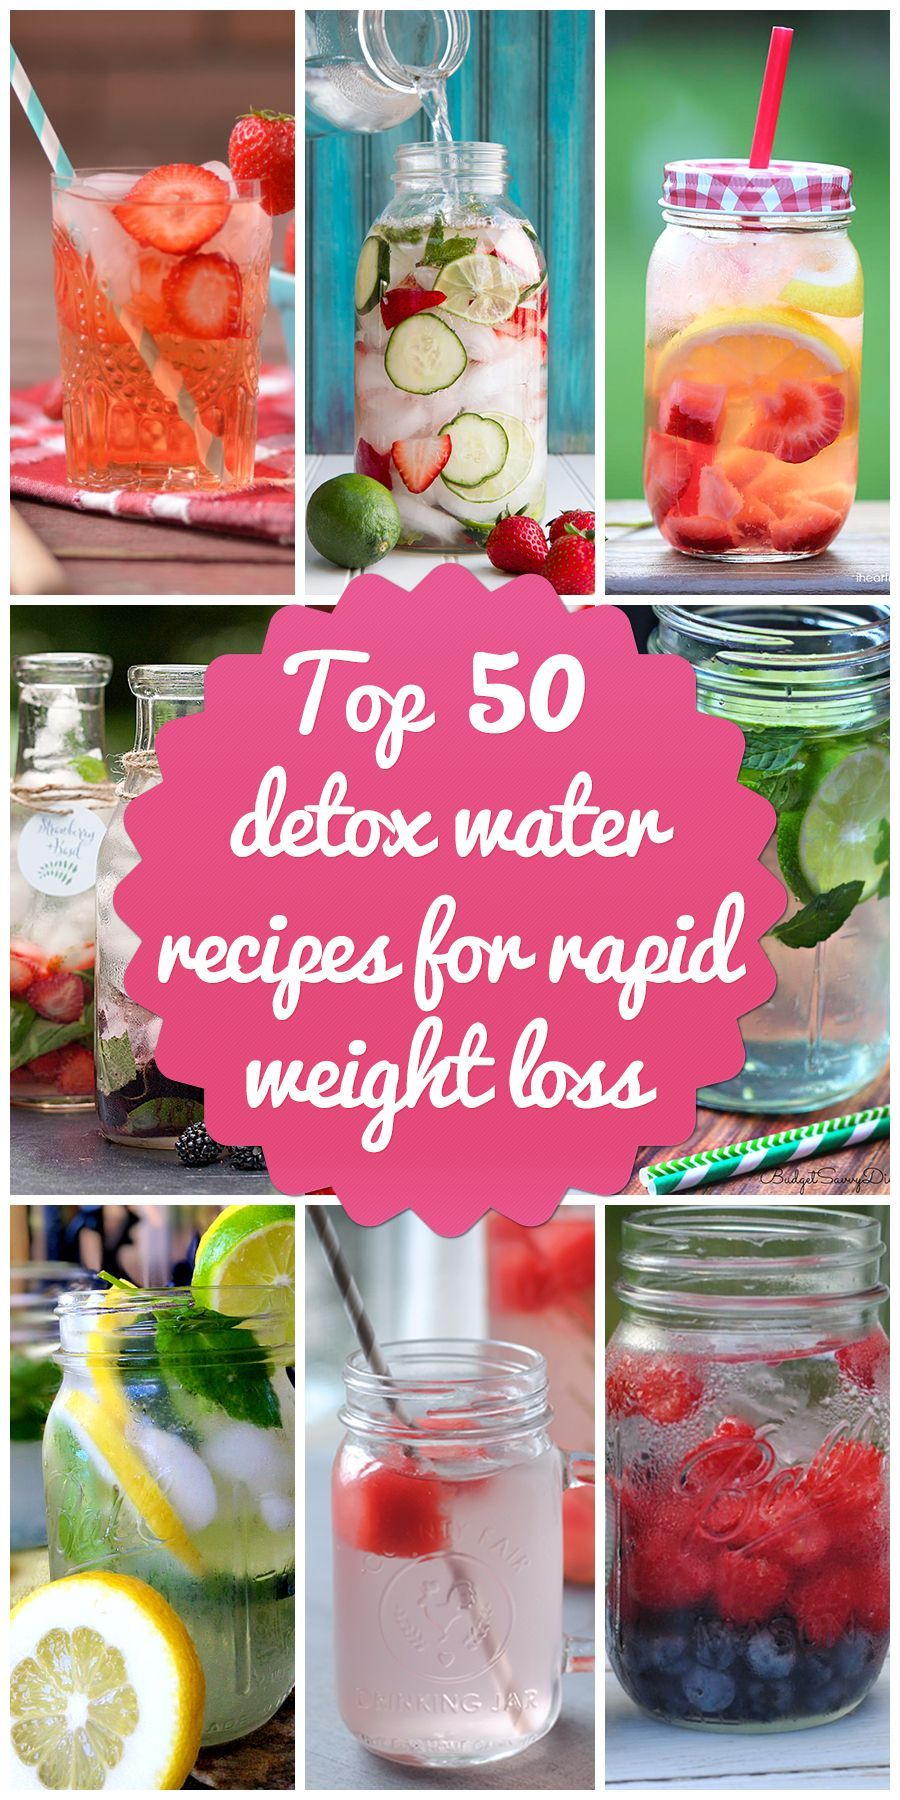 Top 50 detox drinks for rapid weight loss–or how about to enjoy a healthy treat?